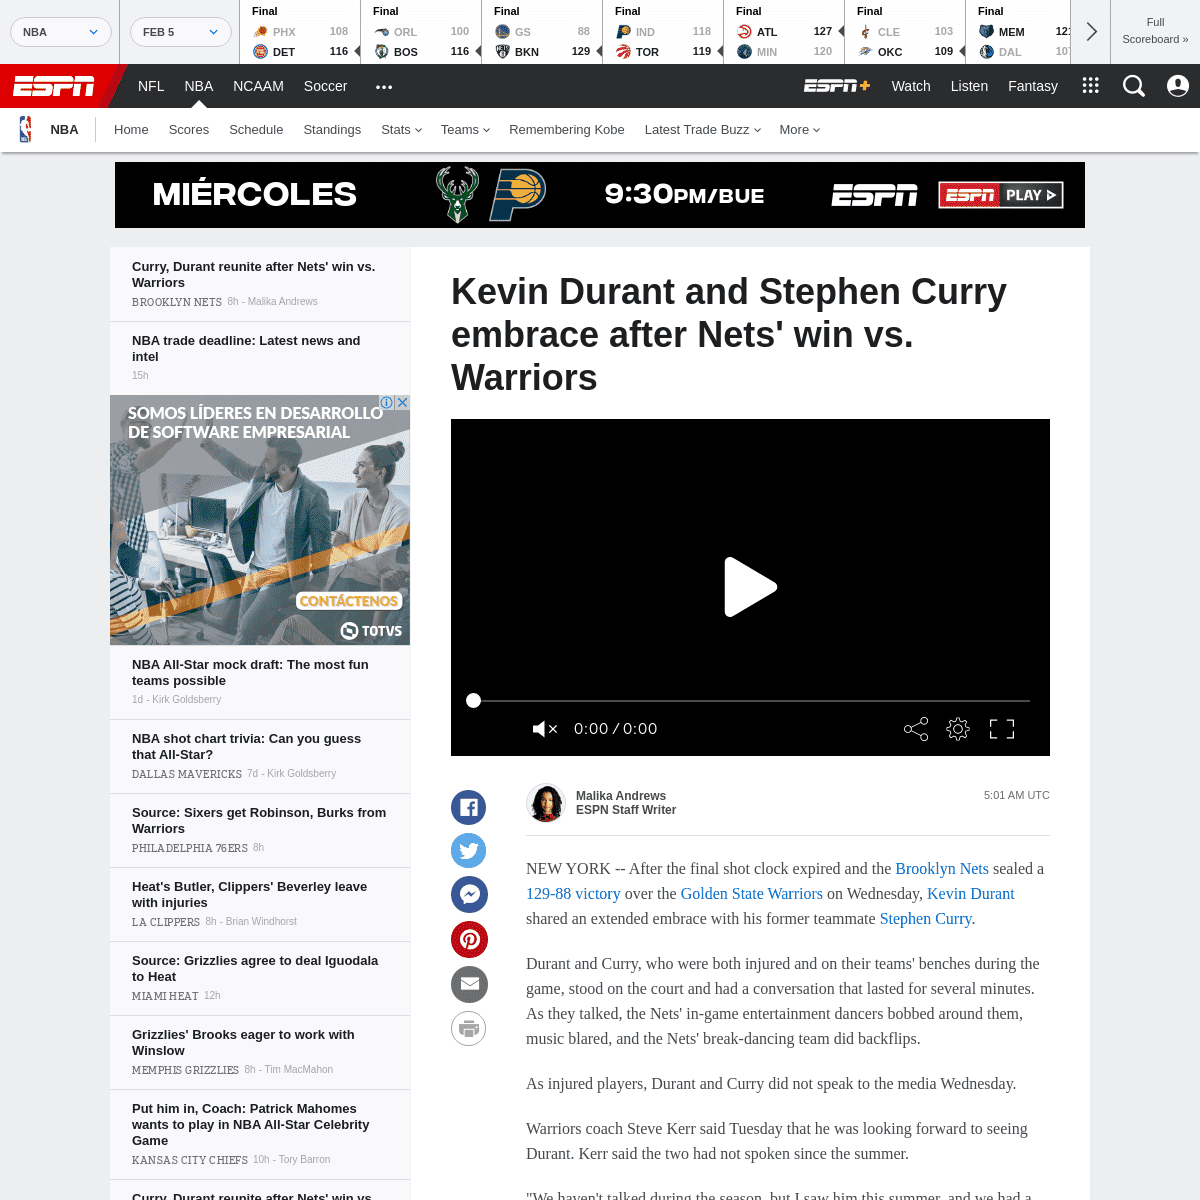 A complete backup of www.espn.com/nba/story/_/id/28644233/kevin-durant-stephen-curry-embrace-nets-win-vs-warriors